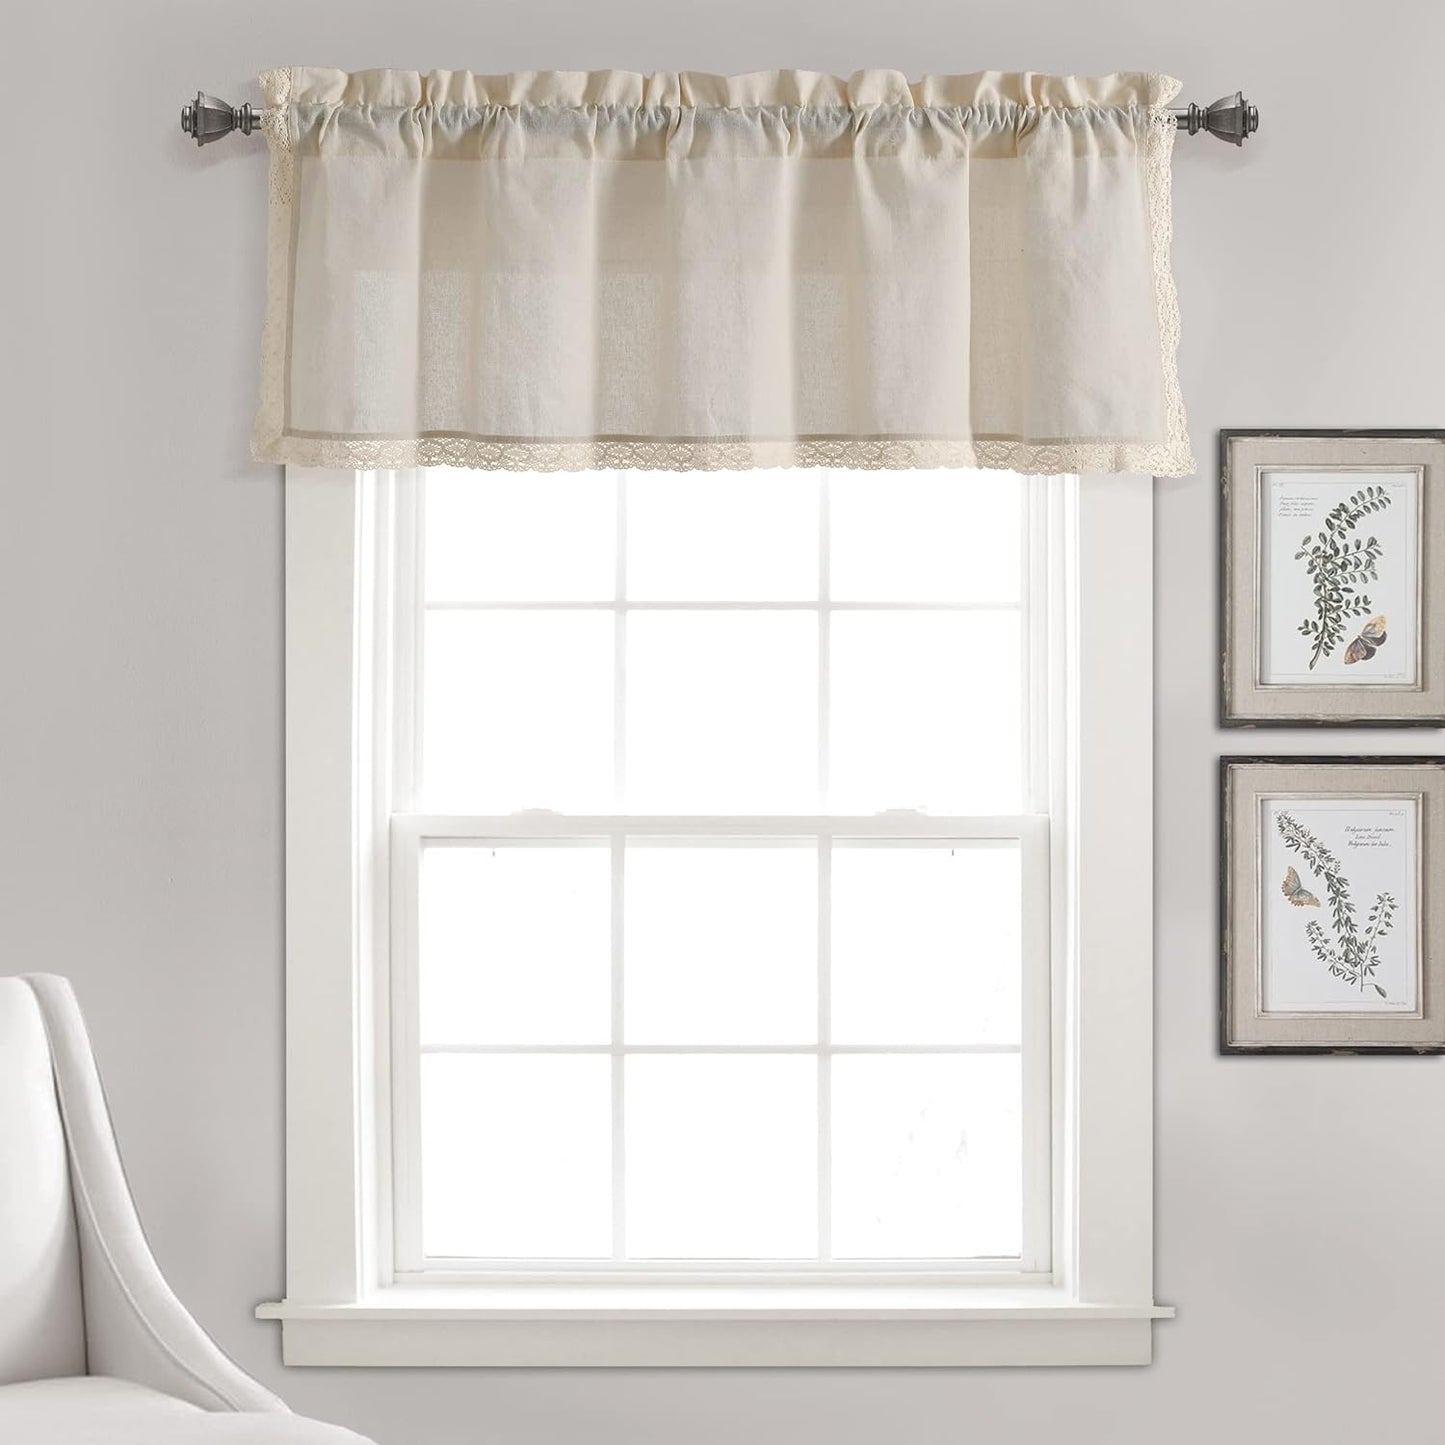 Lush Decor Rosalie Light Filtering Window Curtain Panel Set- Pair- Vintage Farmhouse & French Country Style Curtains - Timeless Dreamy Drape - Romantic Lace Trim - 54" W X 84" L, White  Triangle Home Fashions Ivory Valance Valanace